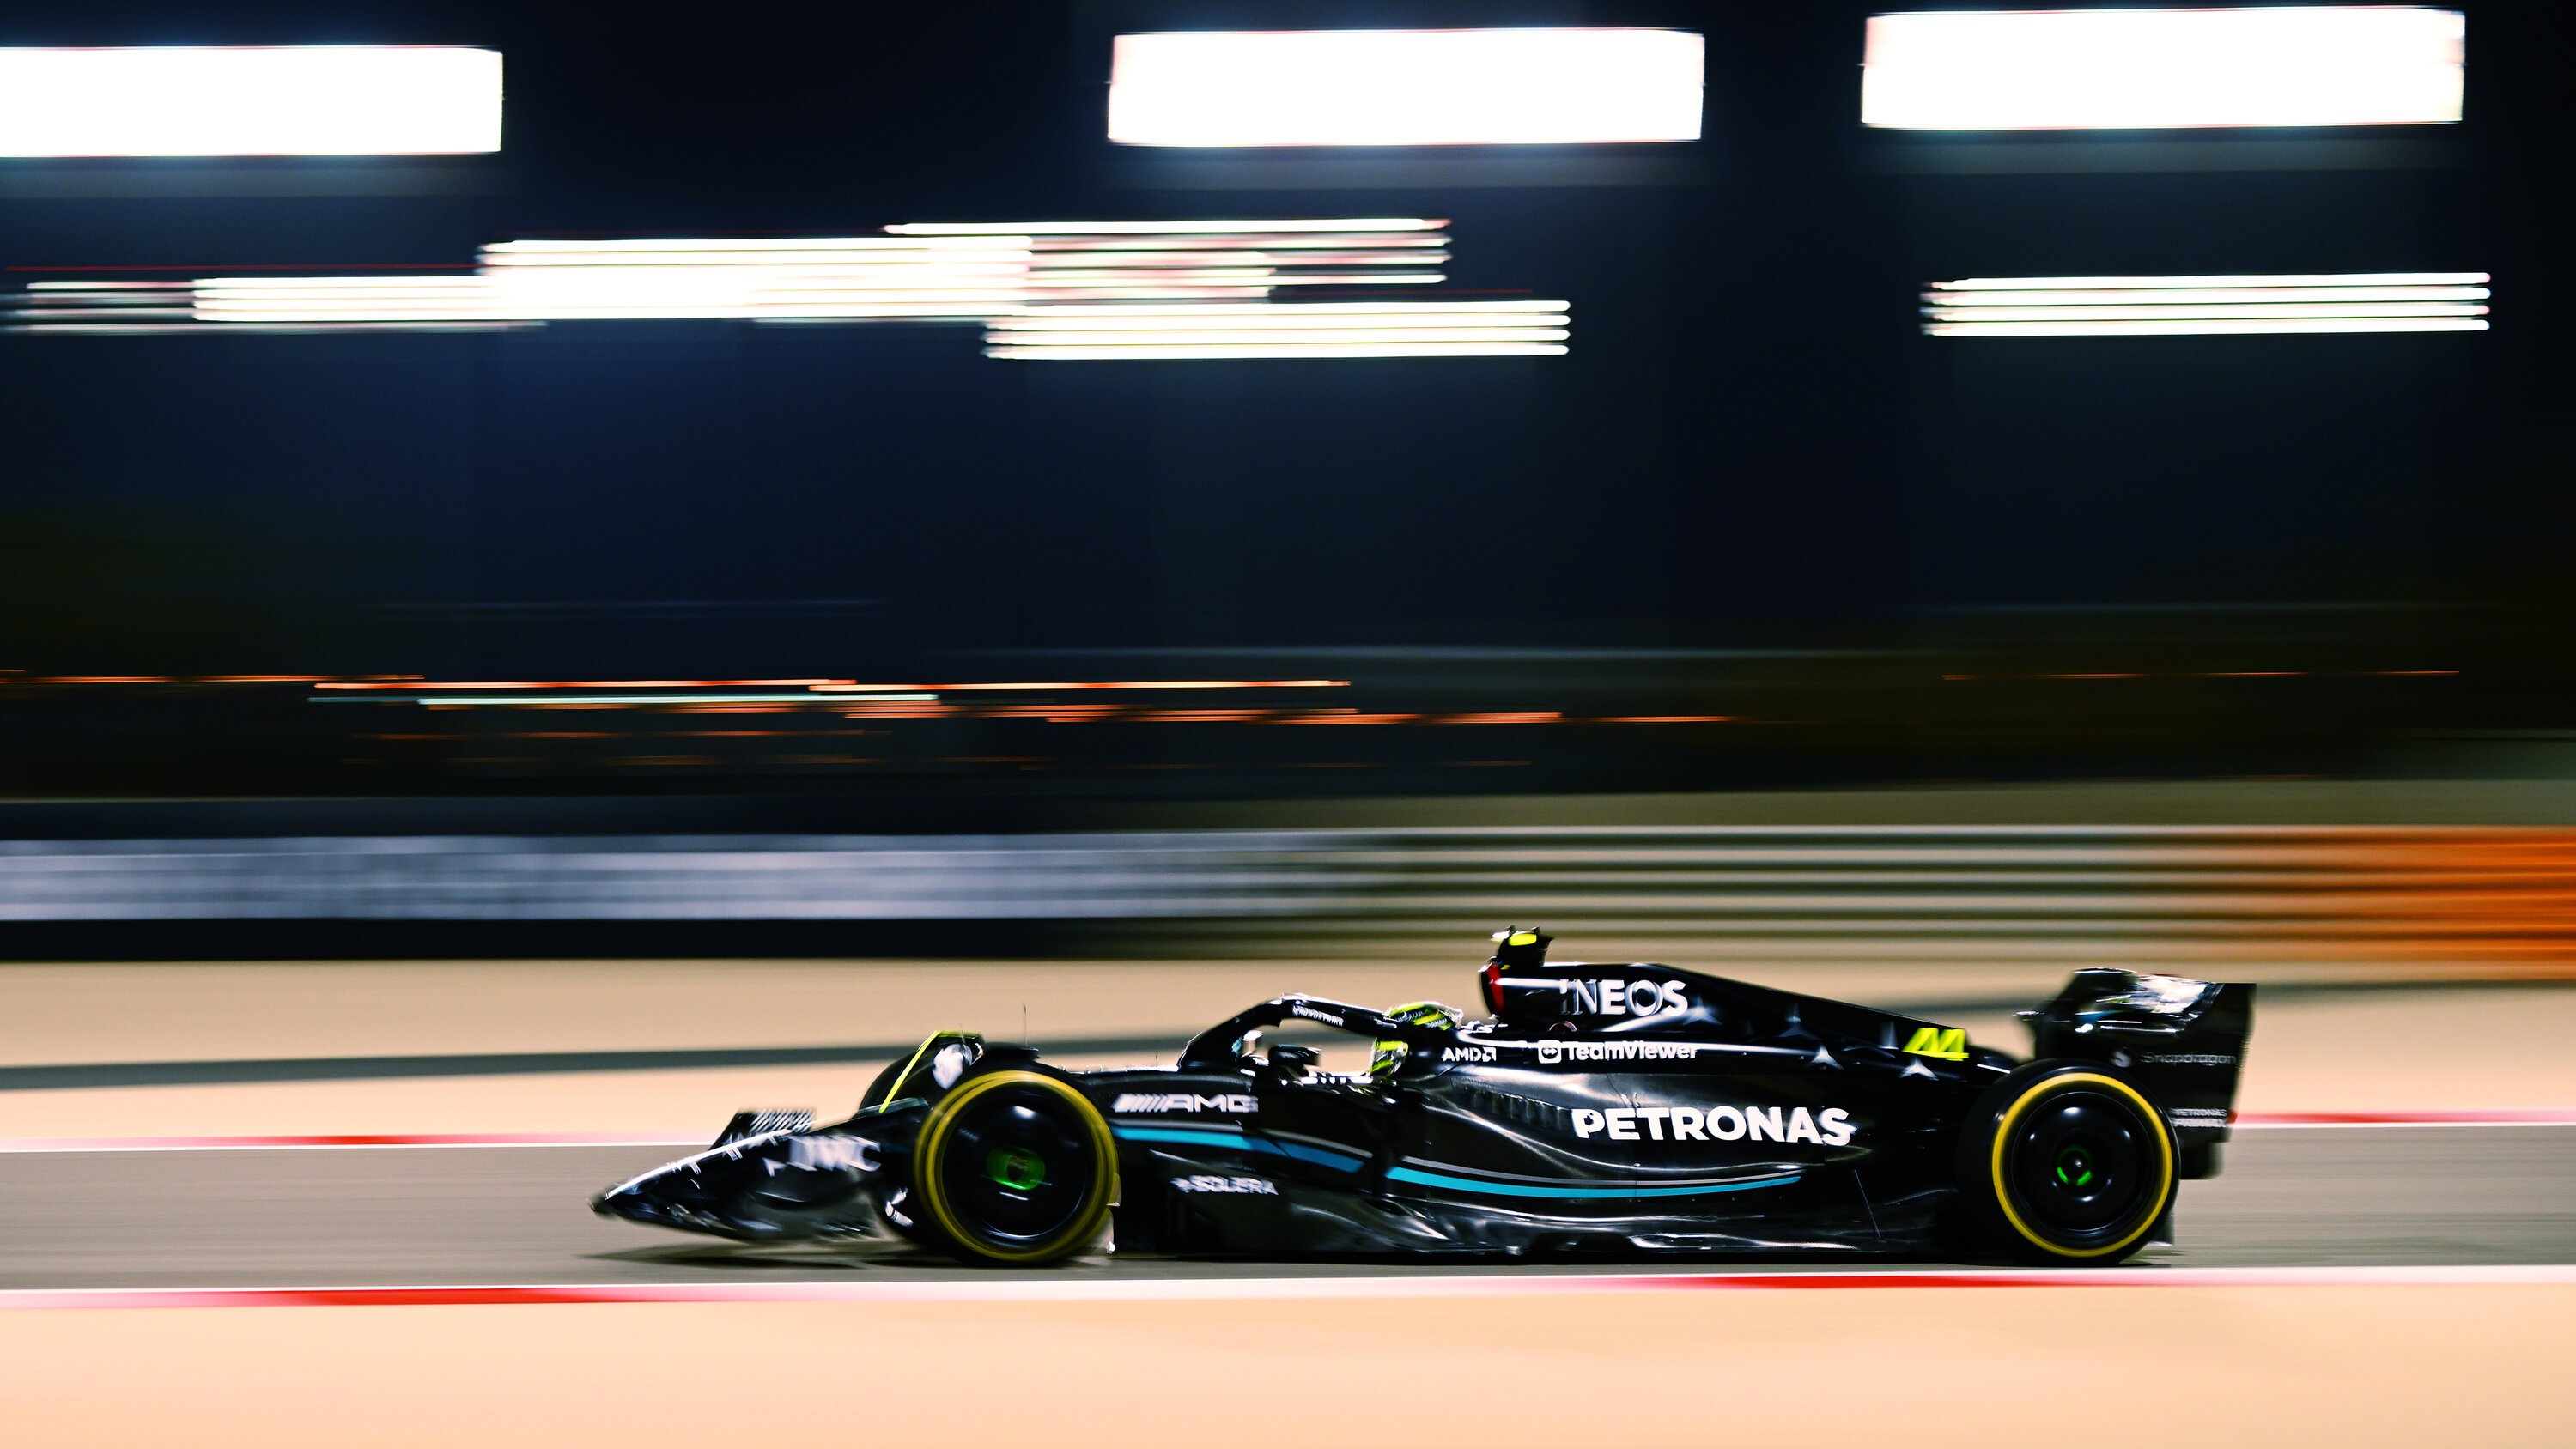 With a Redesigned Car, Mercedes Hopes It Can Unseat Red Bull as F1 Champion